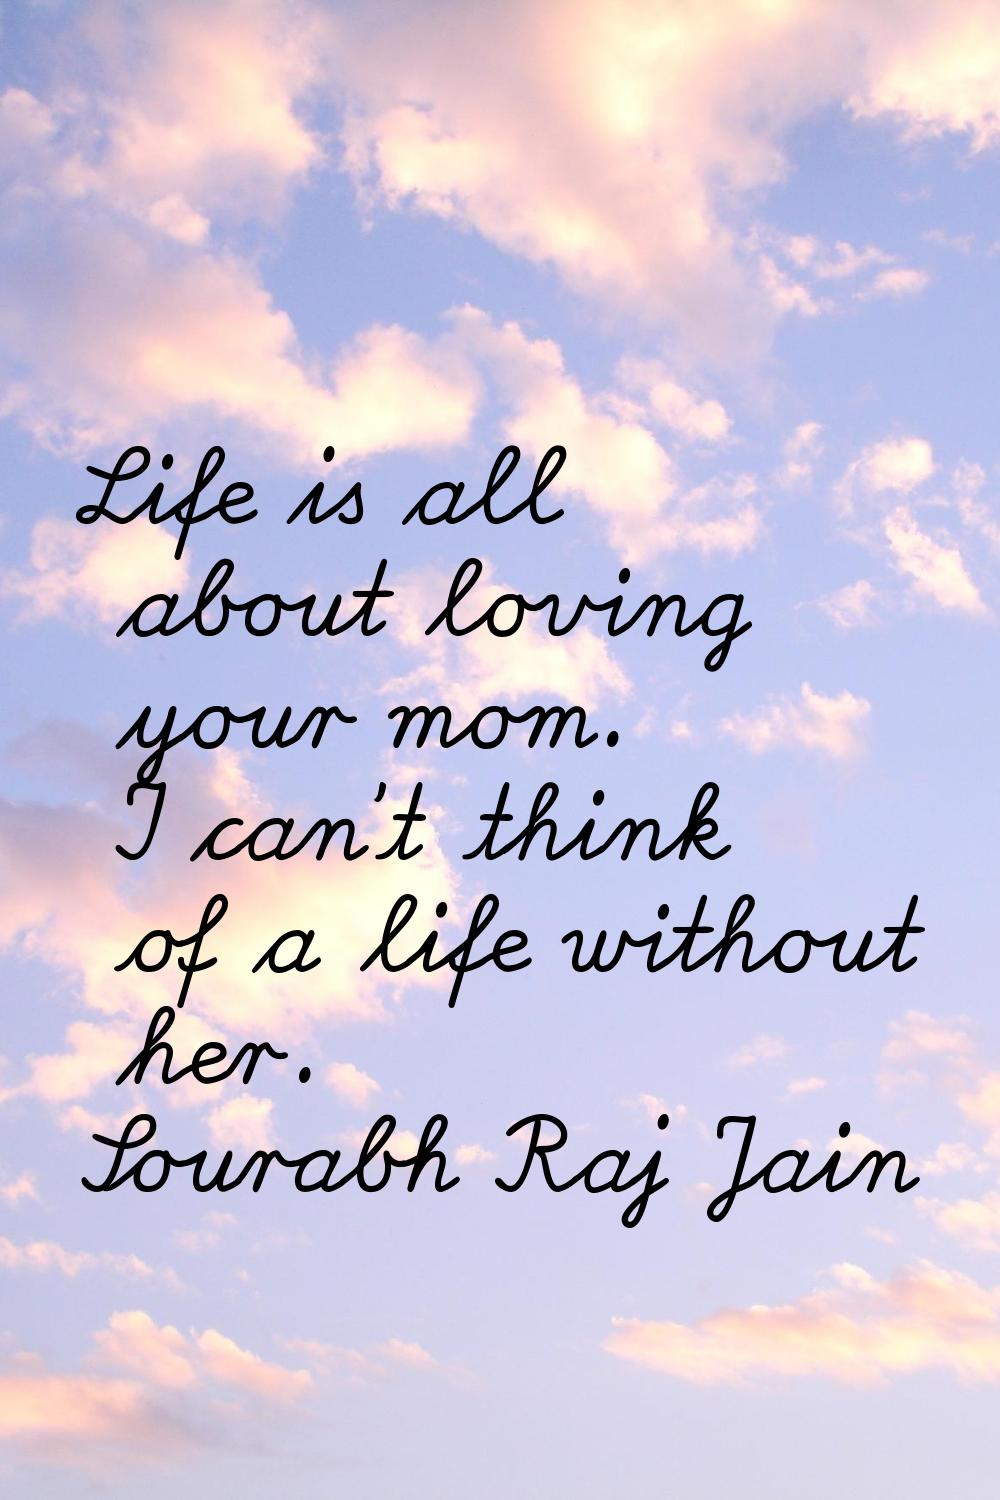 Life is all about loving your mom. I can't think of a life without her.